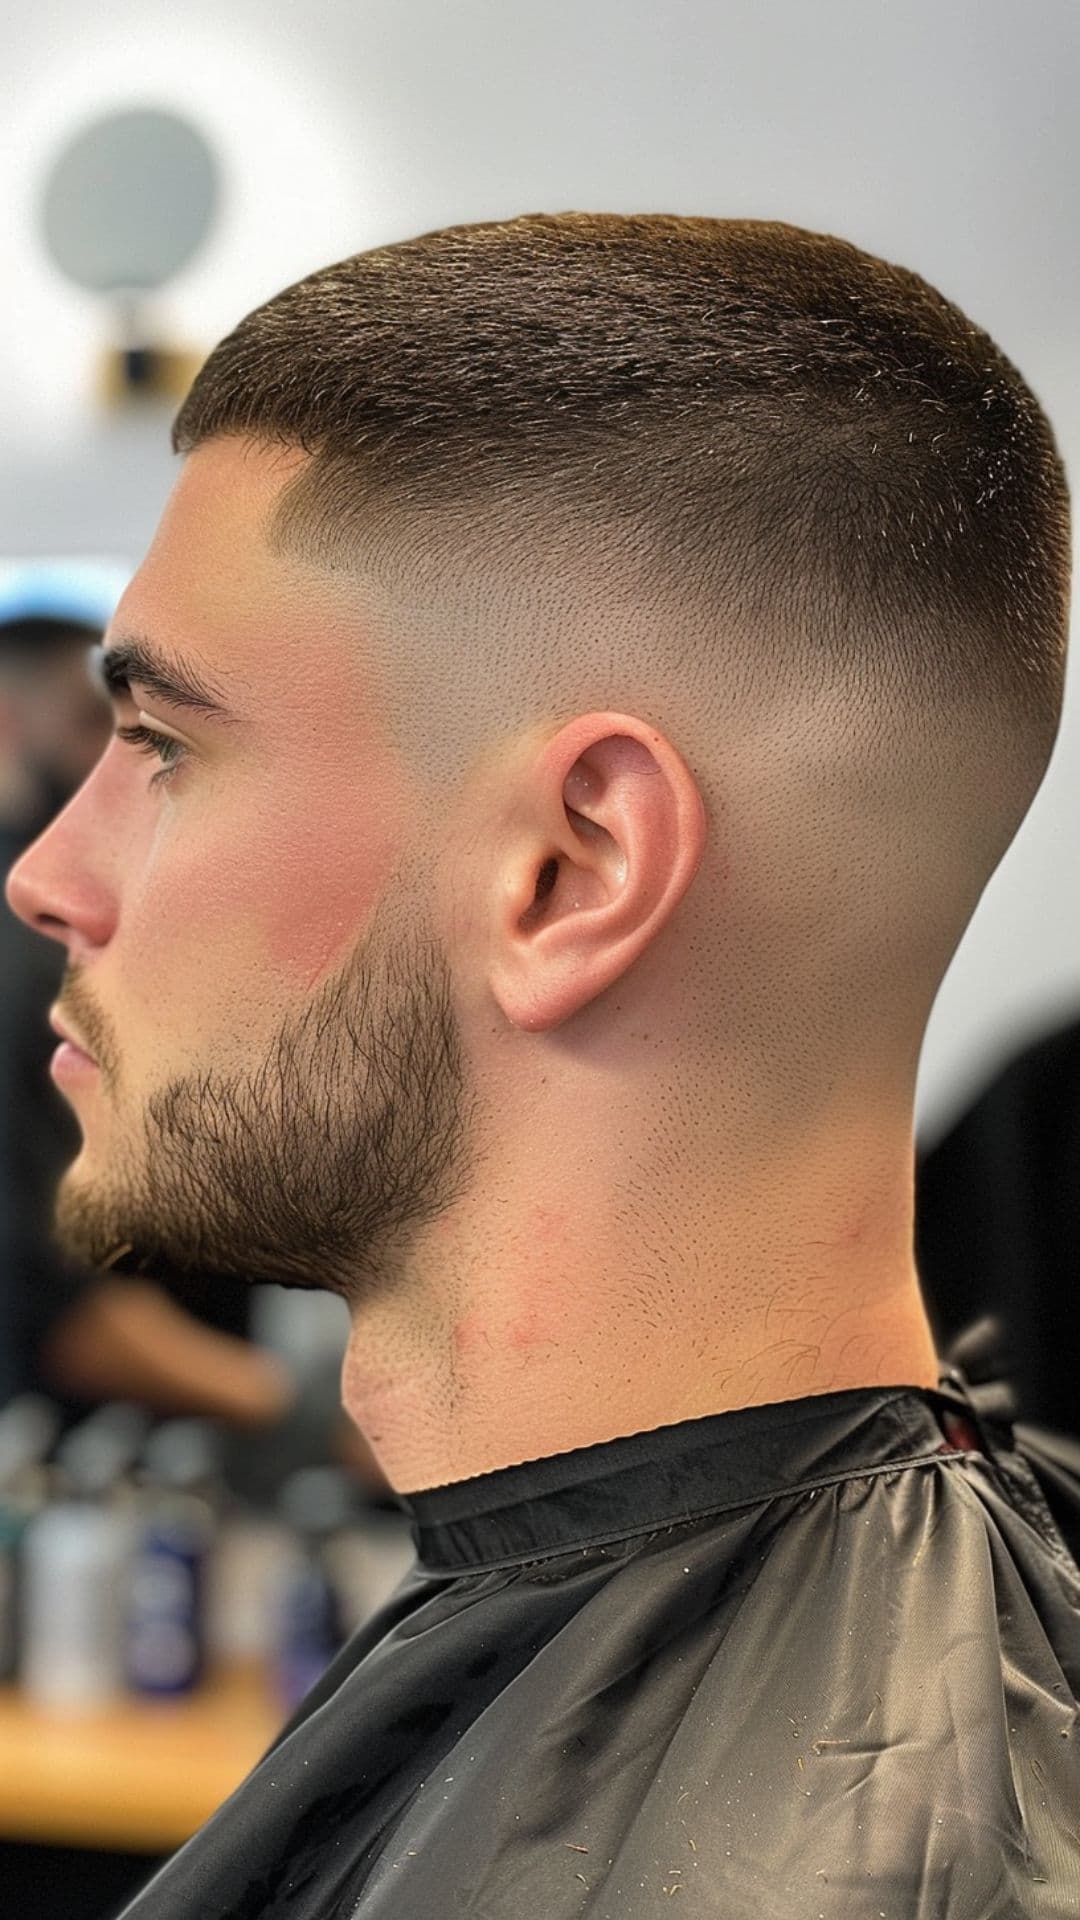 A man modelling a buzz haircut with skin fade.